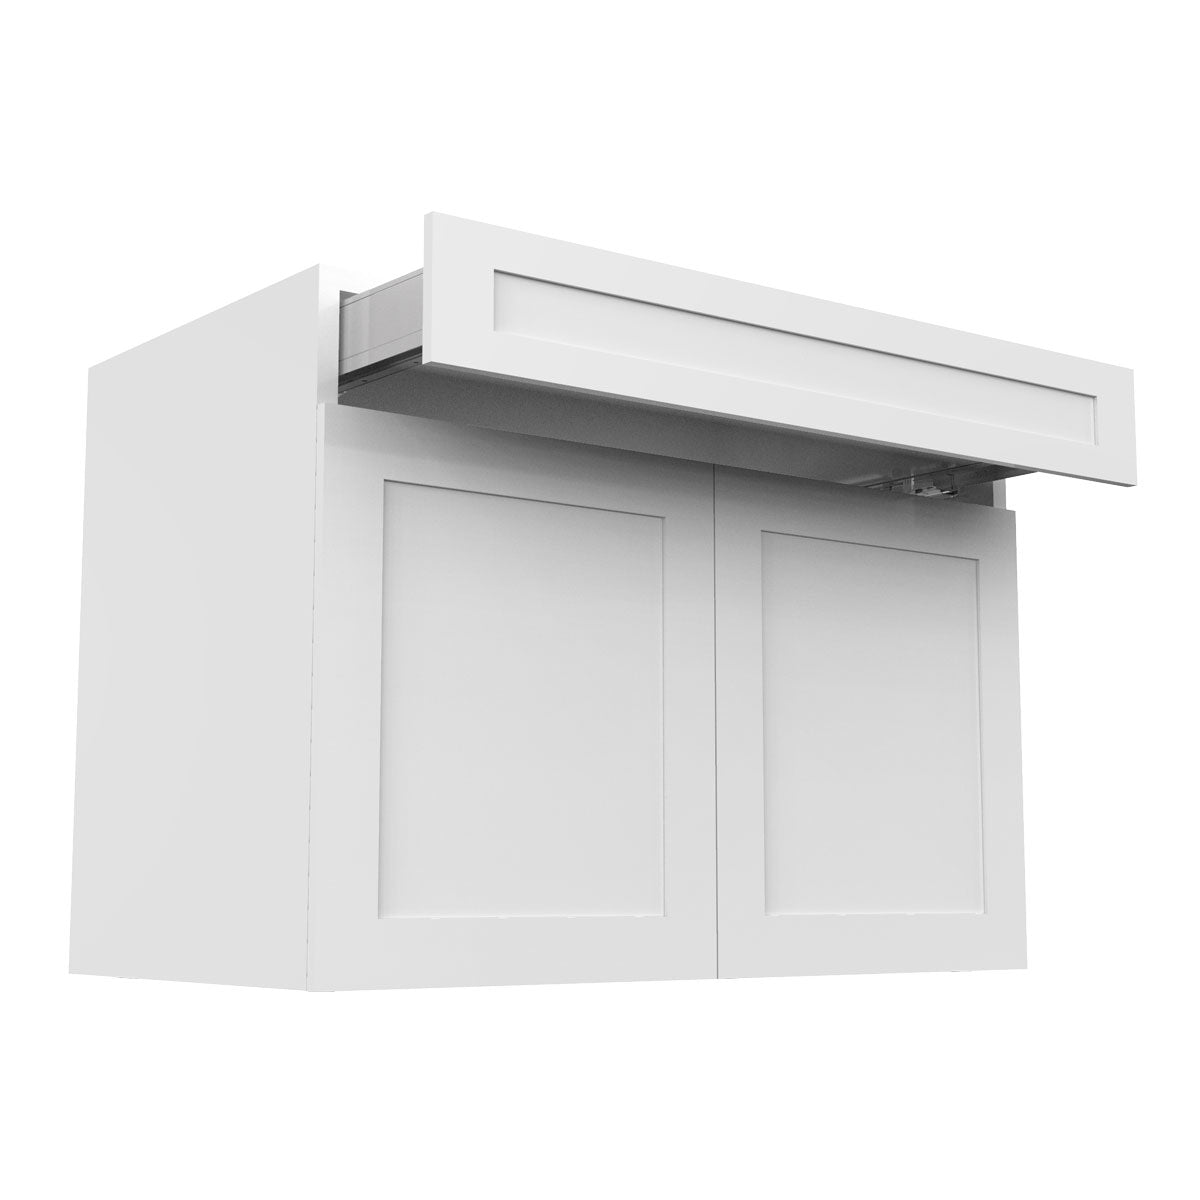 RTA - White Shaker - Double Door Base Cabinets | 42"W x 30"H x 23.8"D